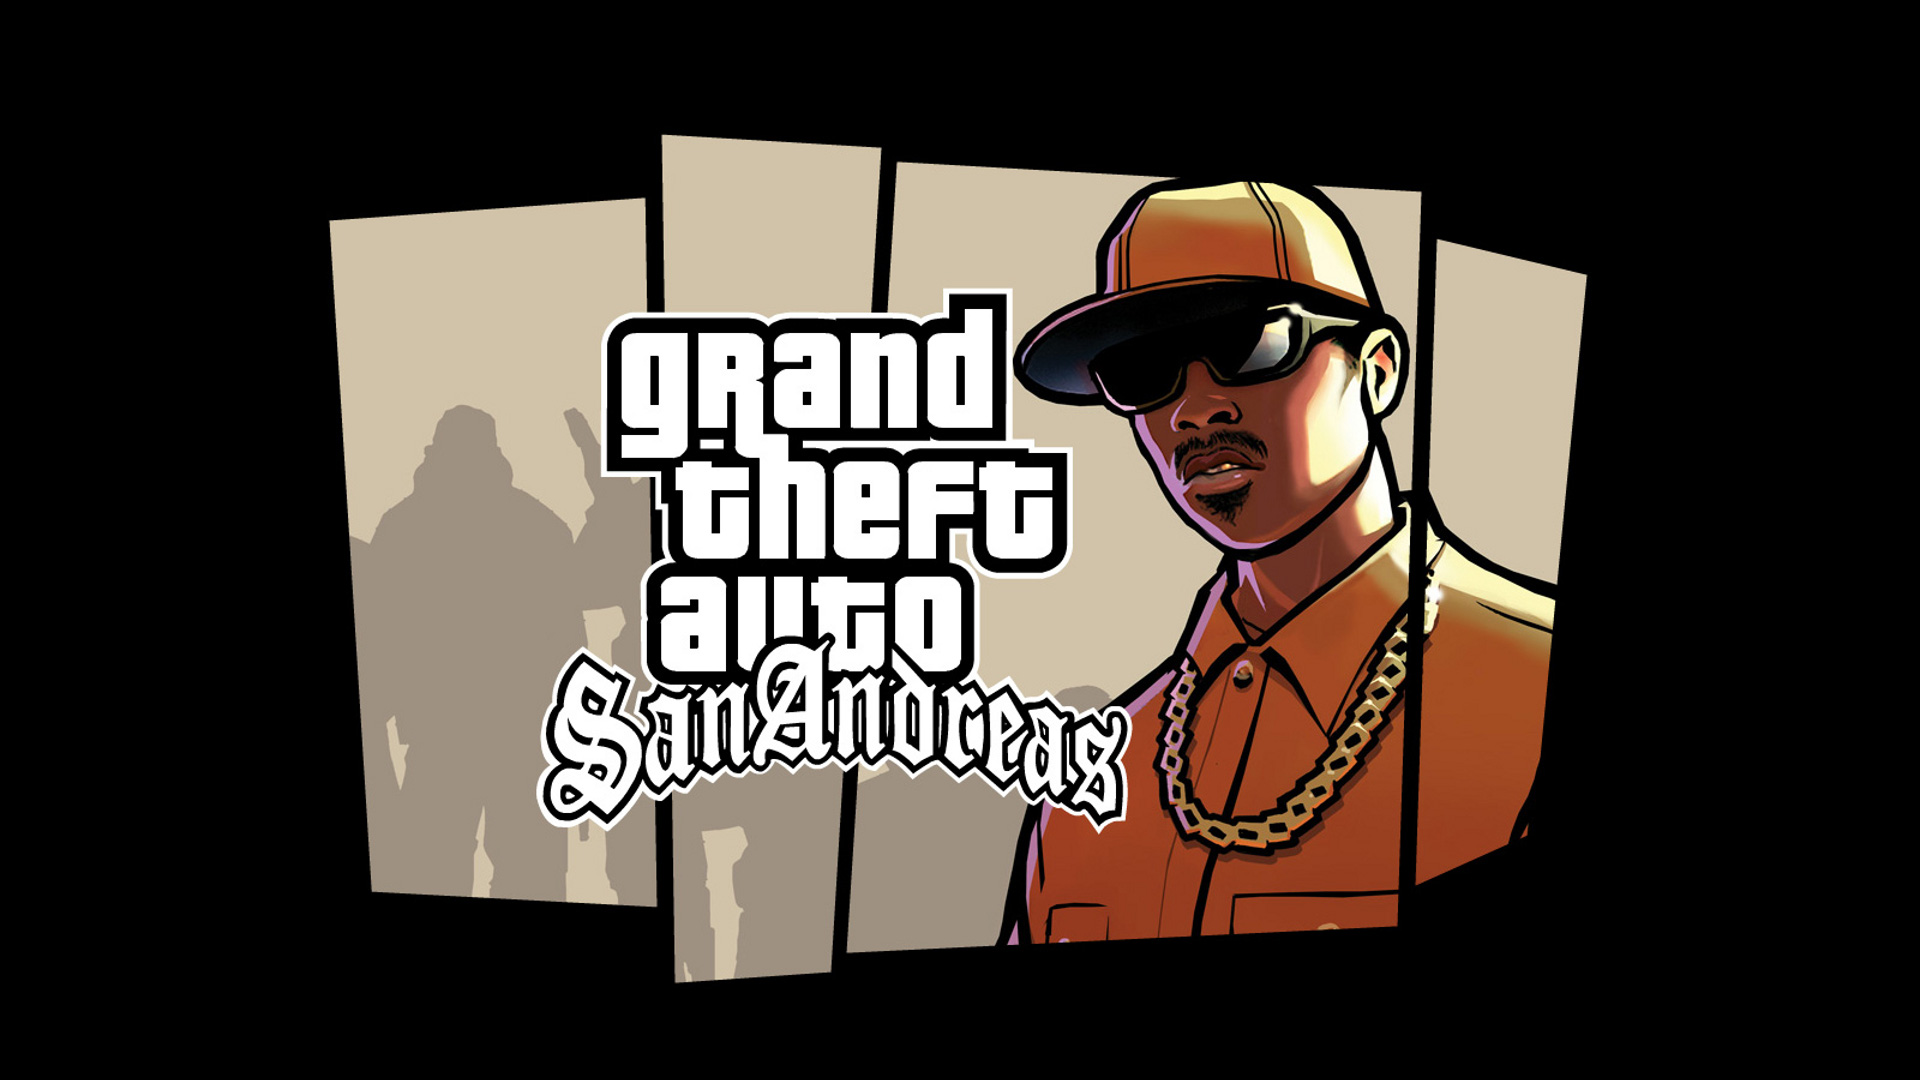 Grand Theft Auto San Andreas HD Wallpaper Background Image